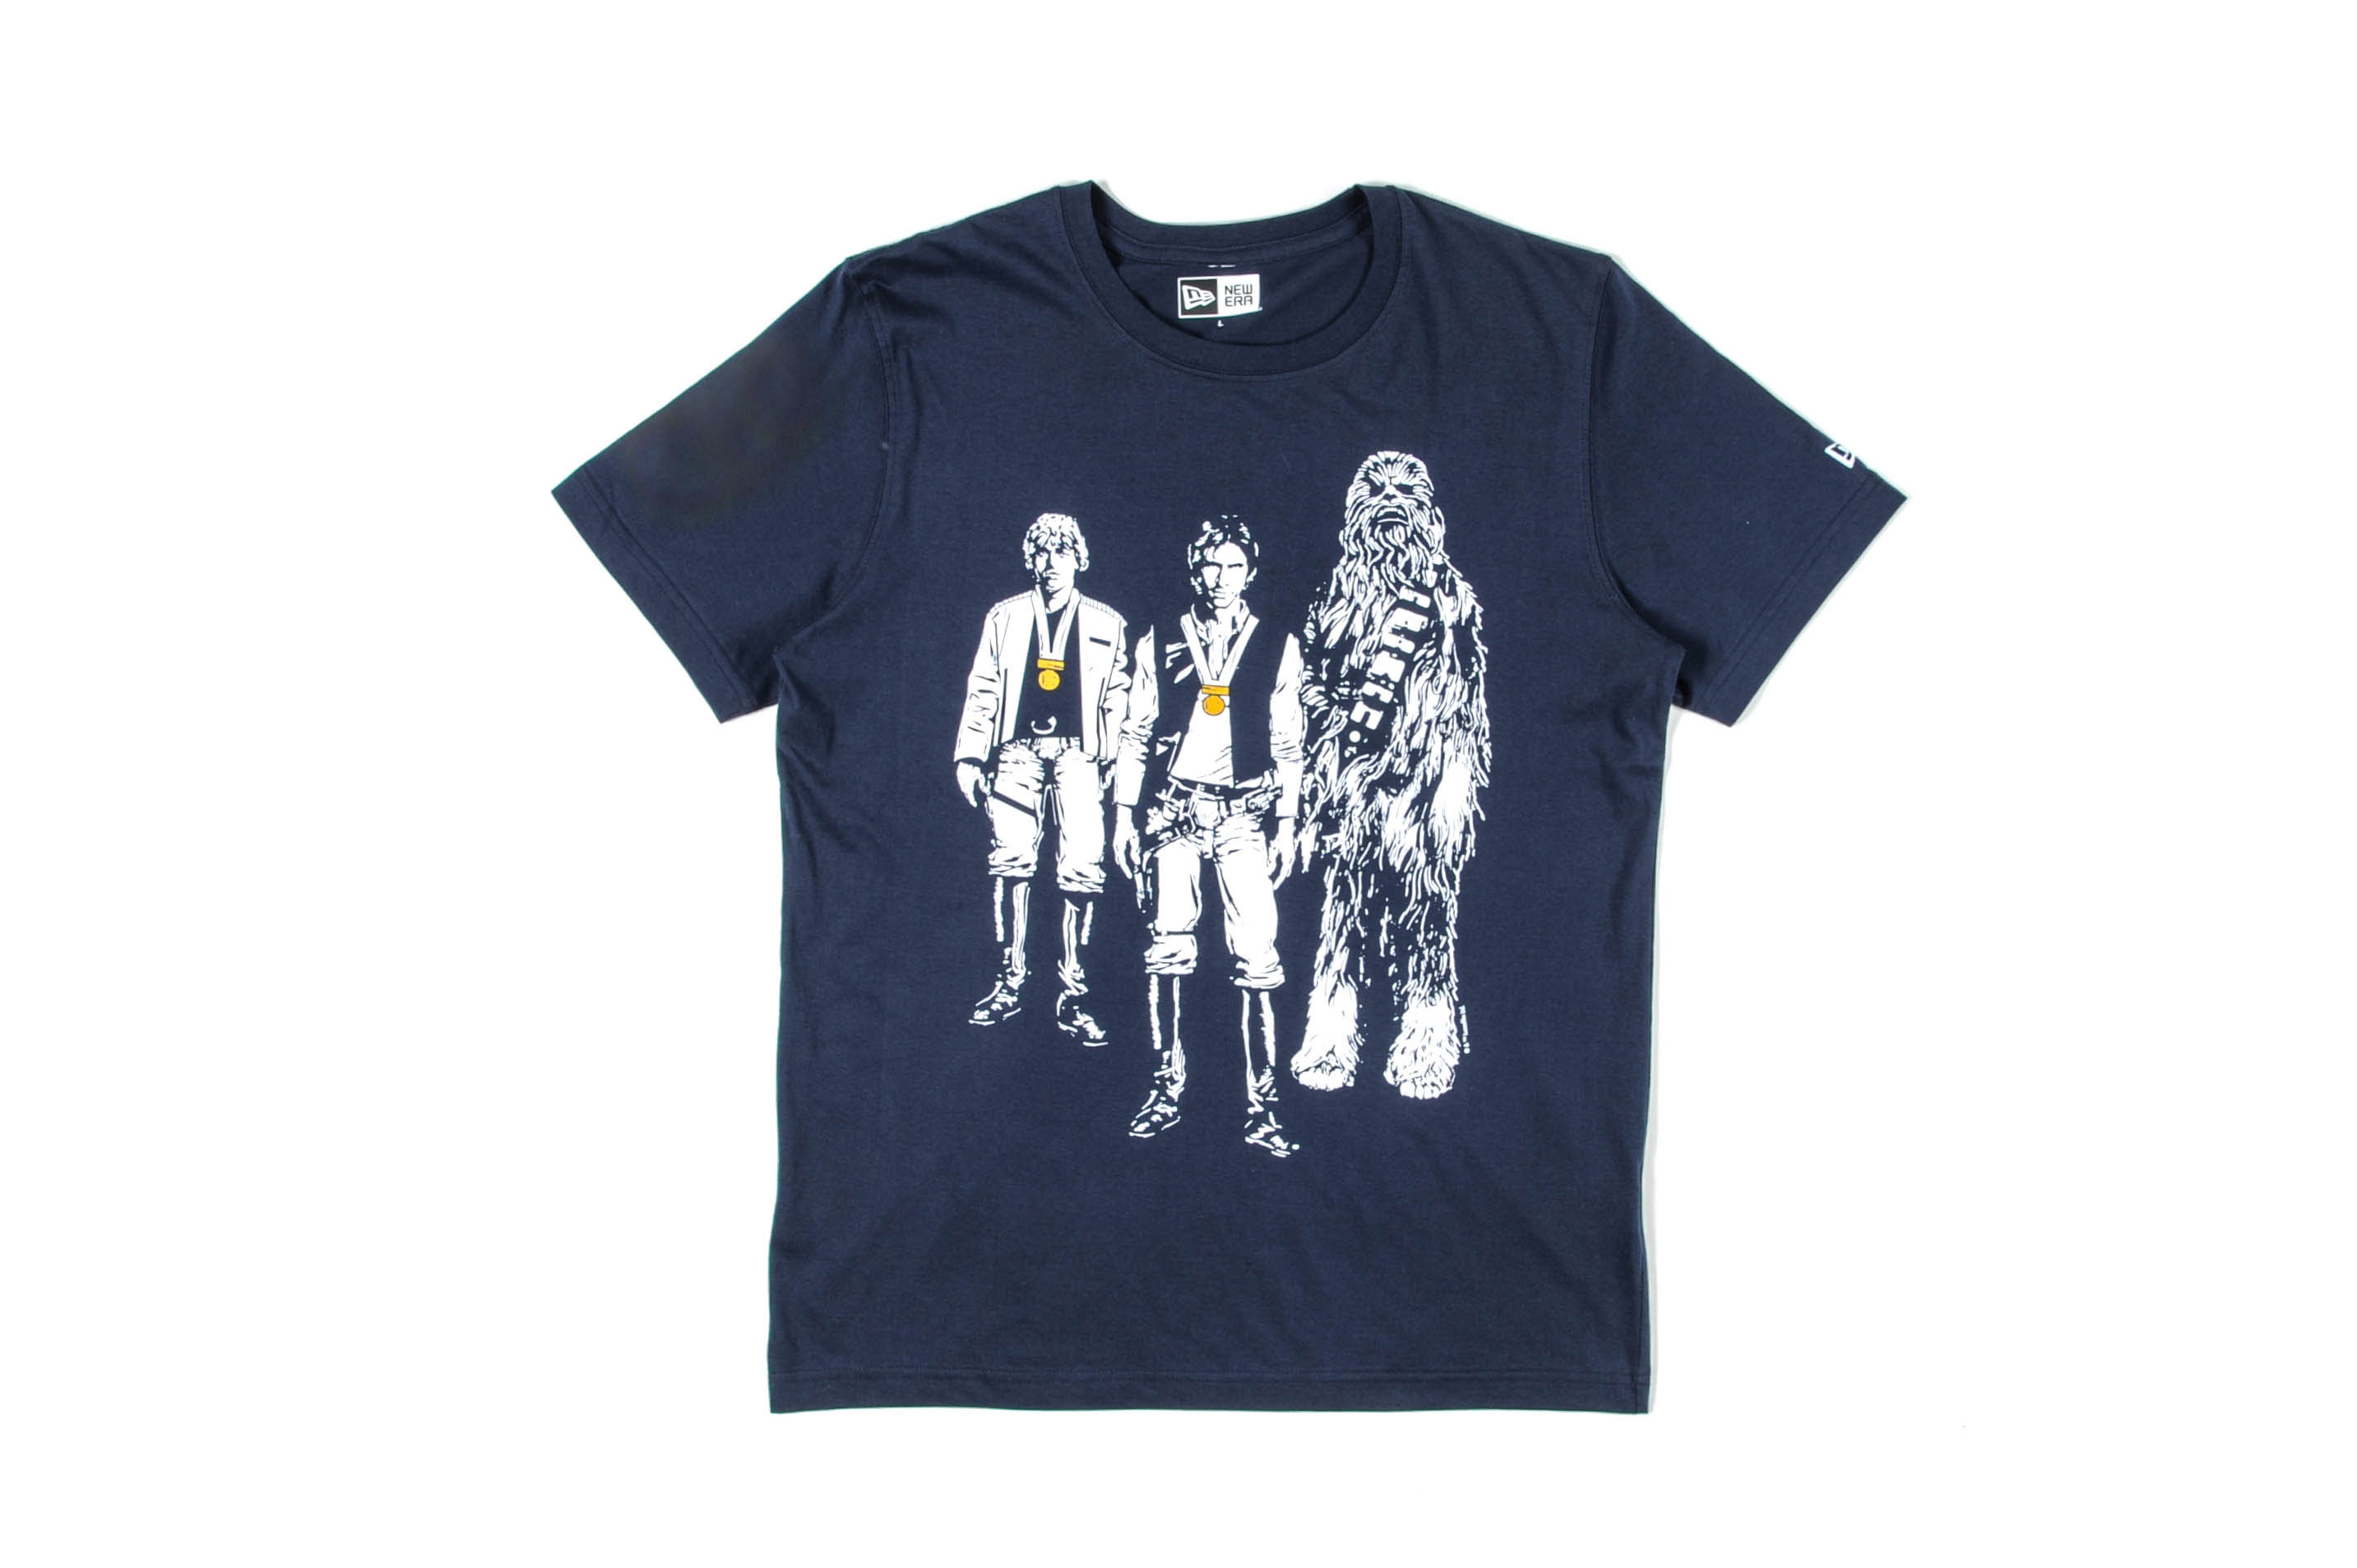 Foot Loker x Star Wars collection 